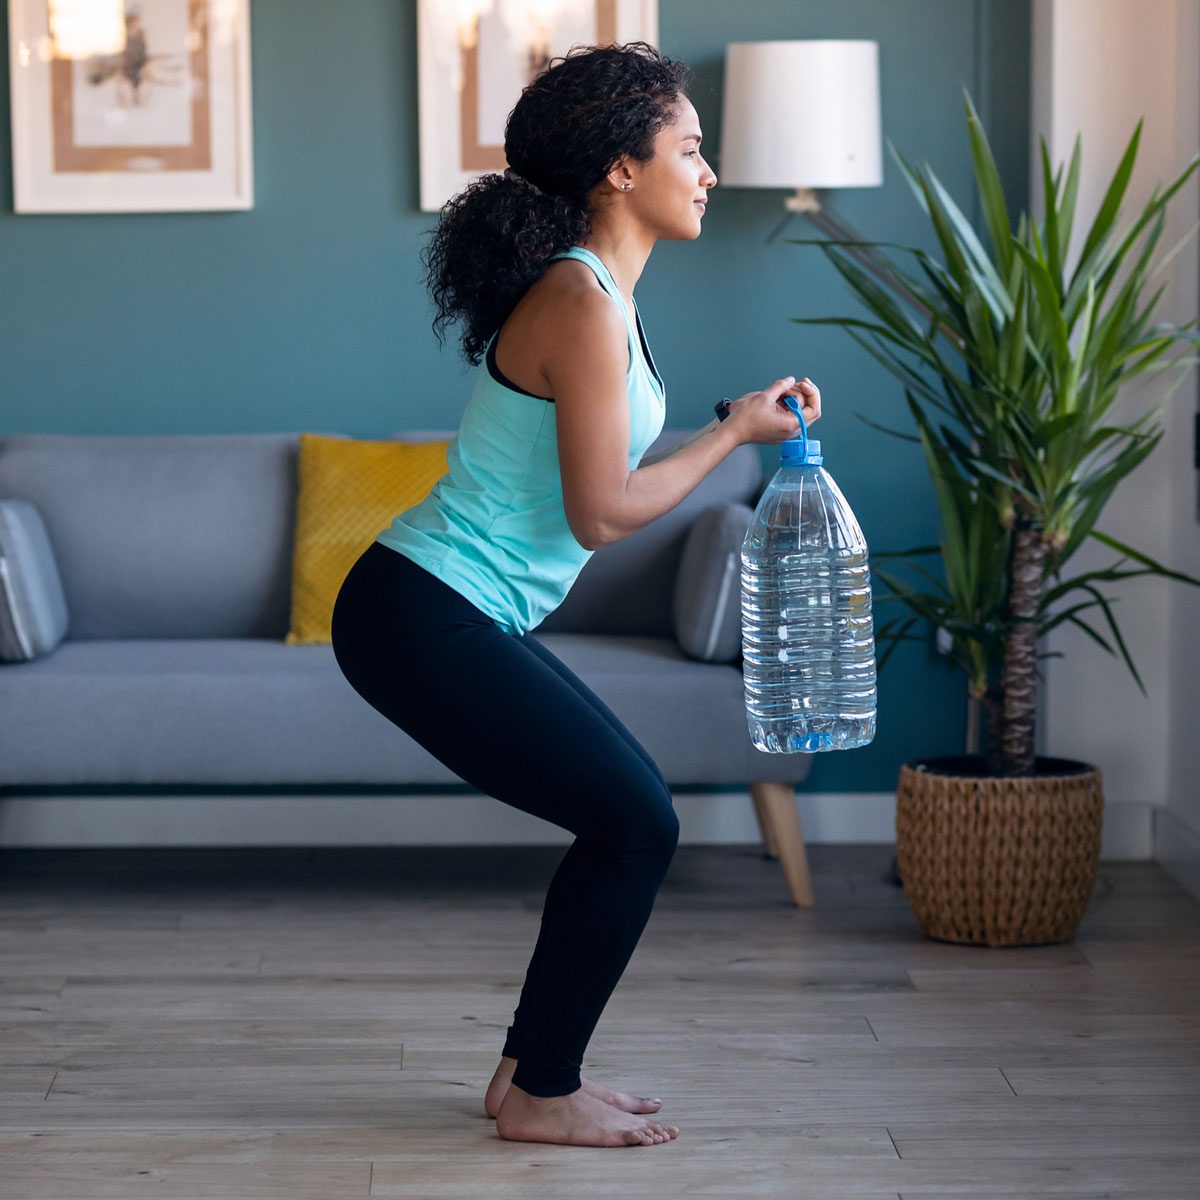 Woman squatting with Bottle Weight Gettyimages 1299959870